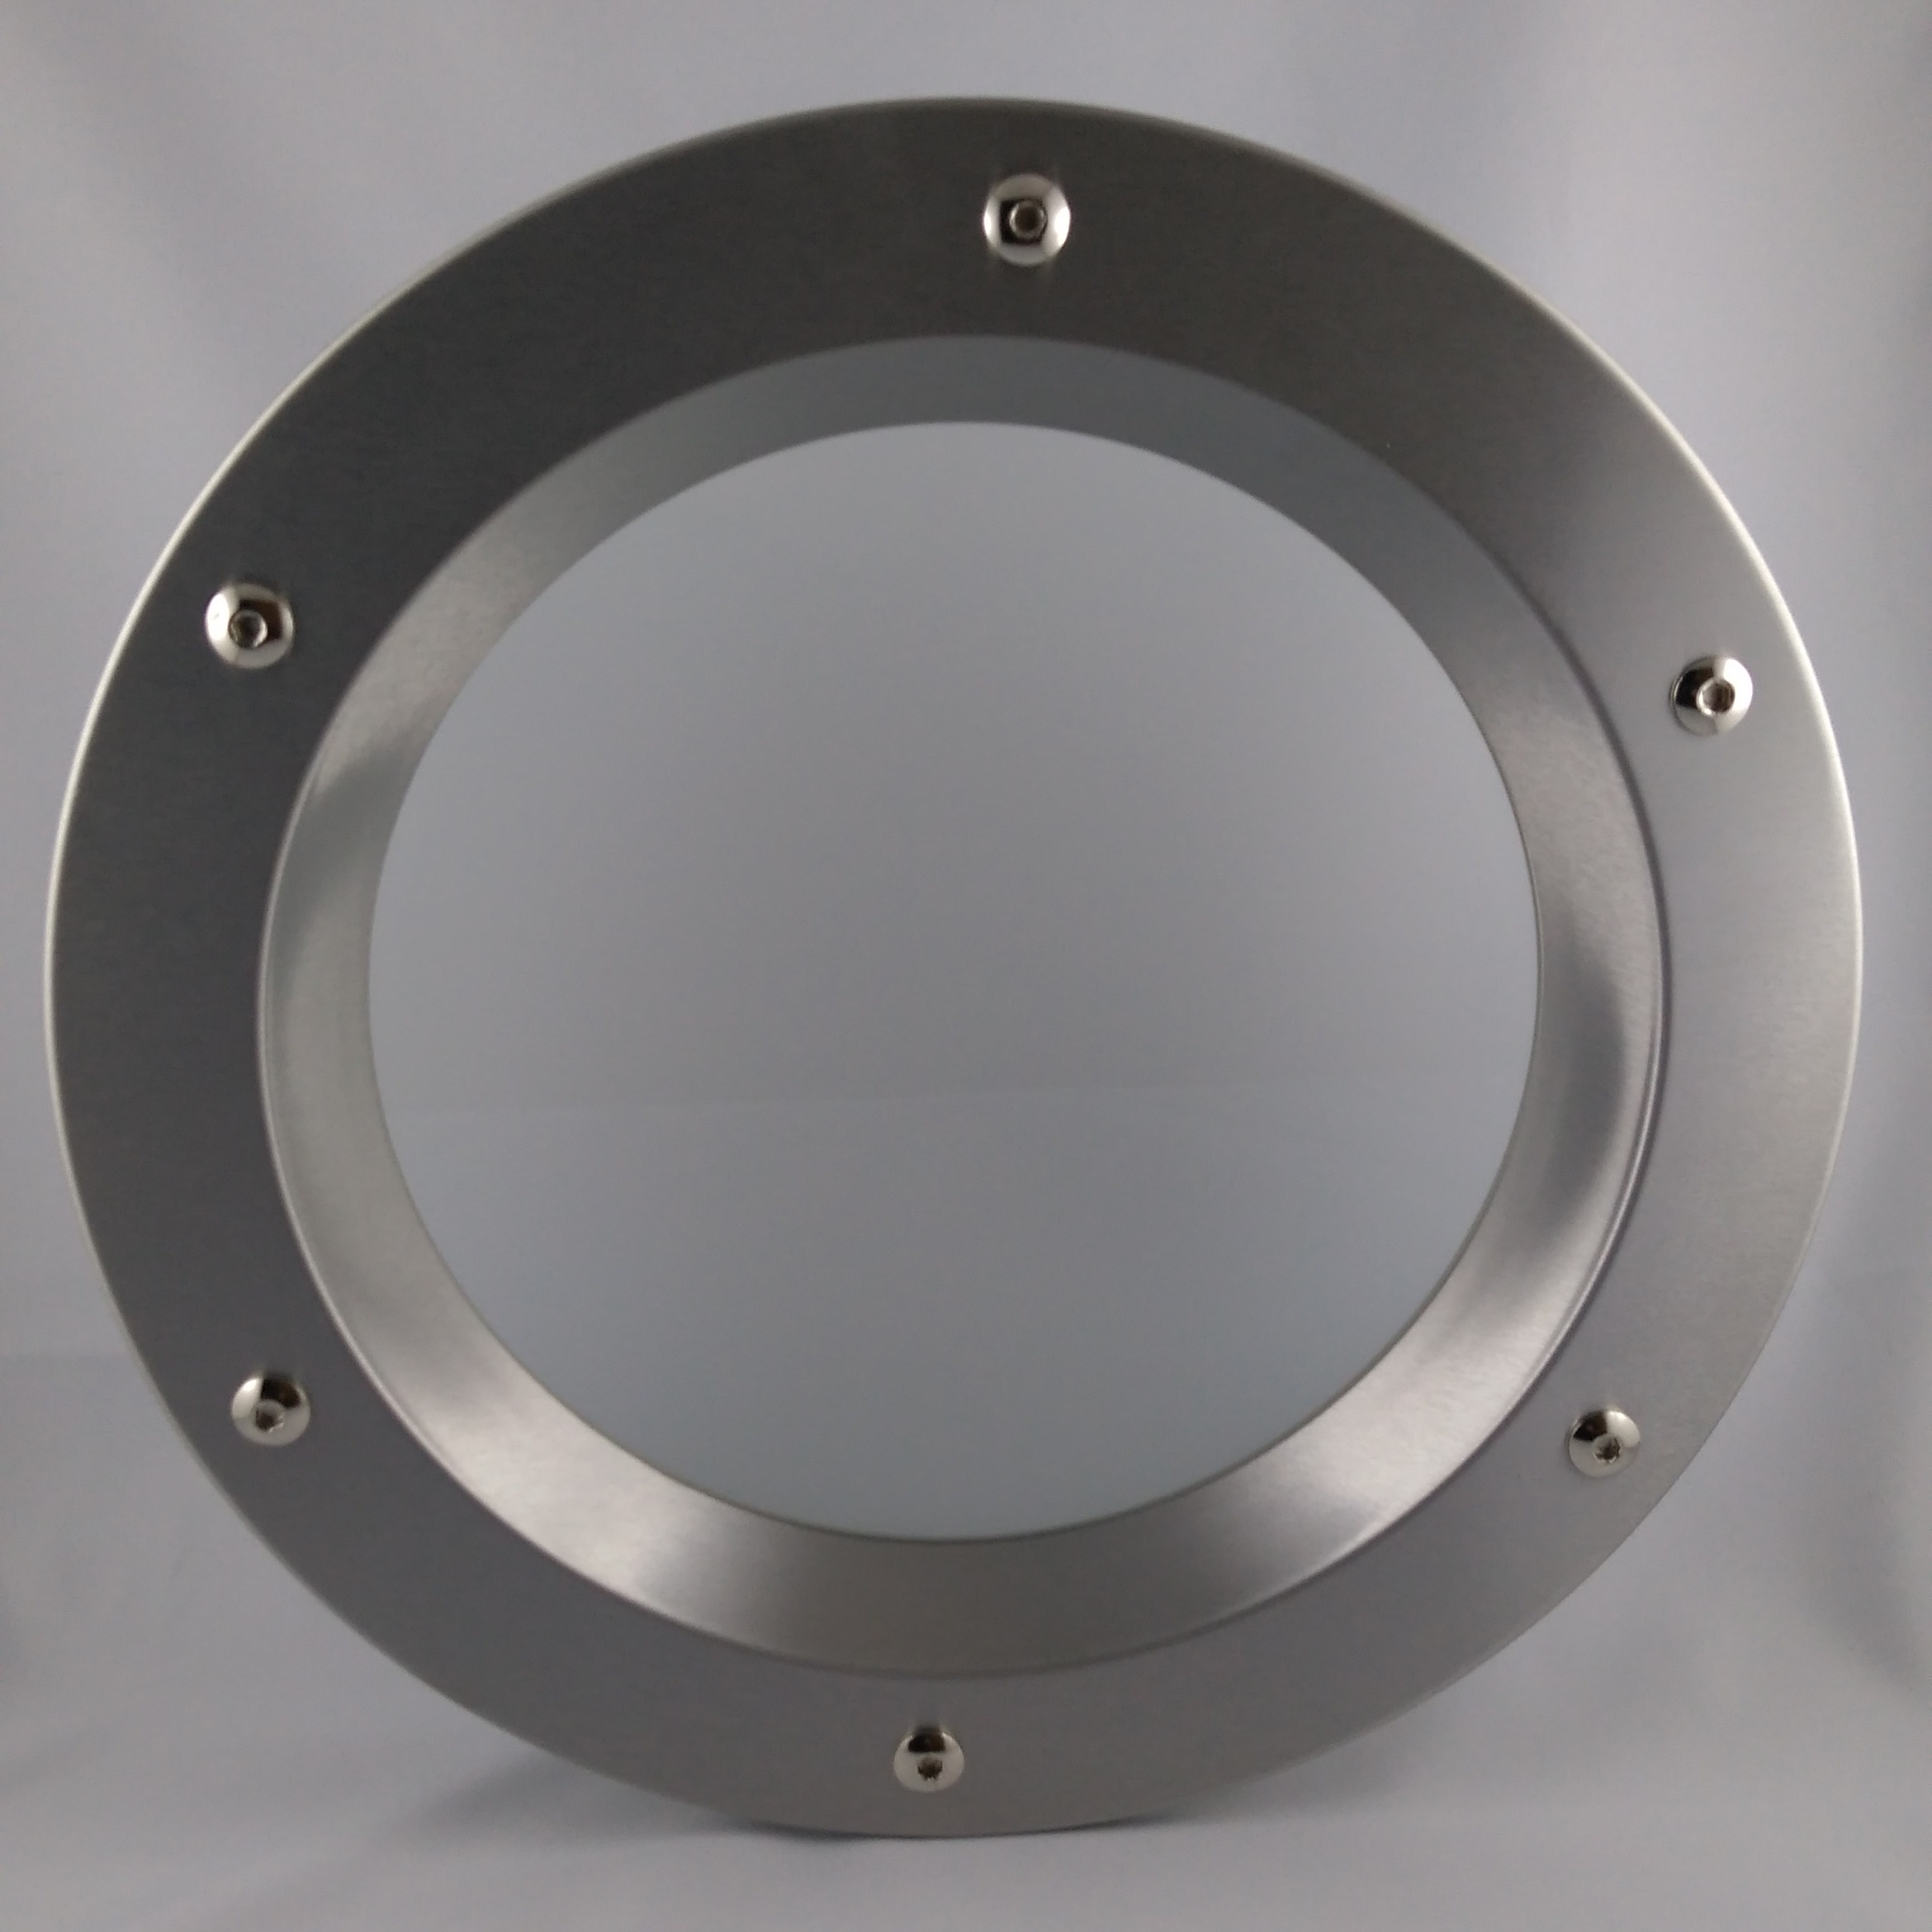 New Beautiful. STAINLESS STEEL PORTHOLE VISION PANELS FOR DOORS phi 350 mm 